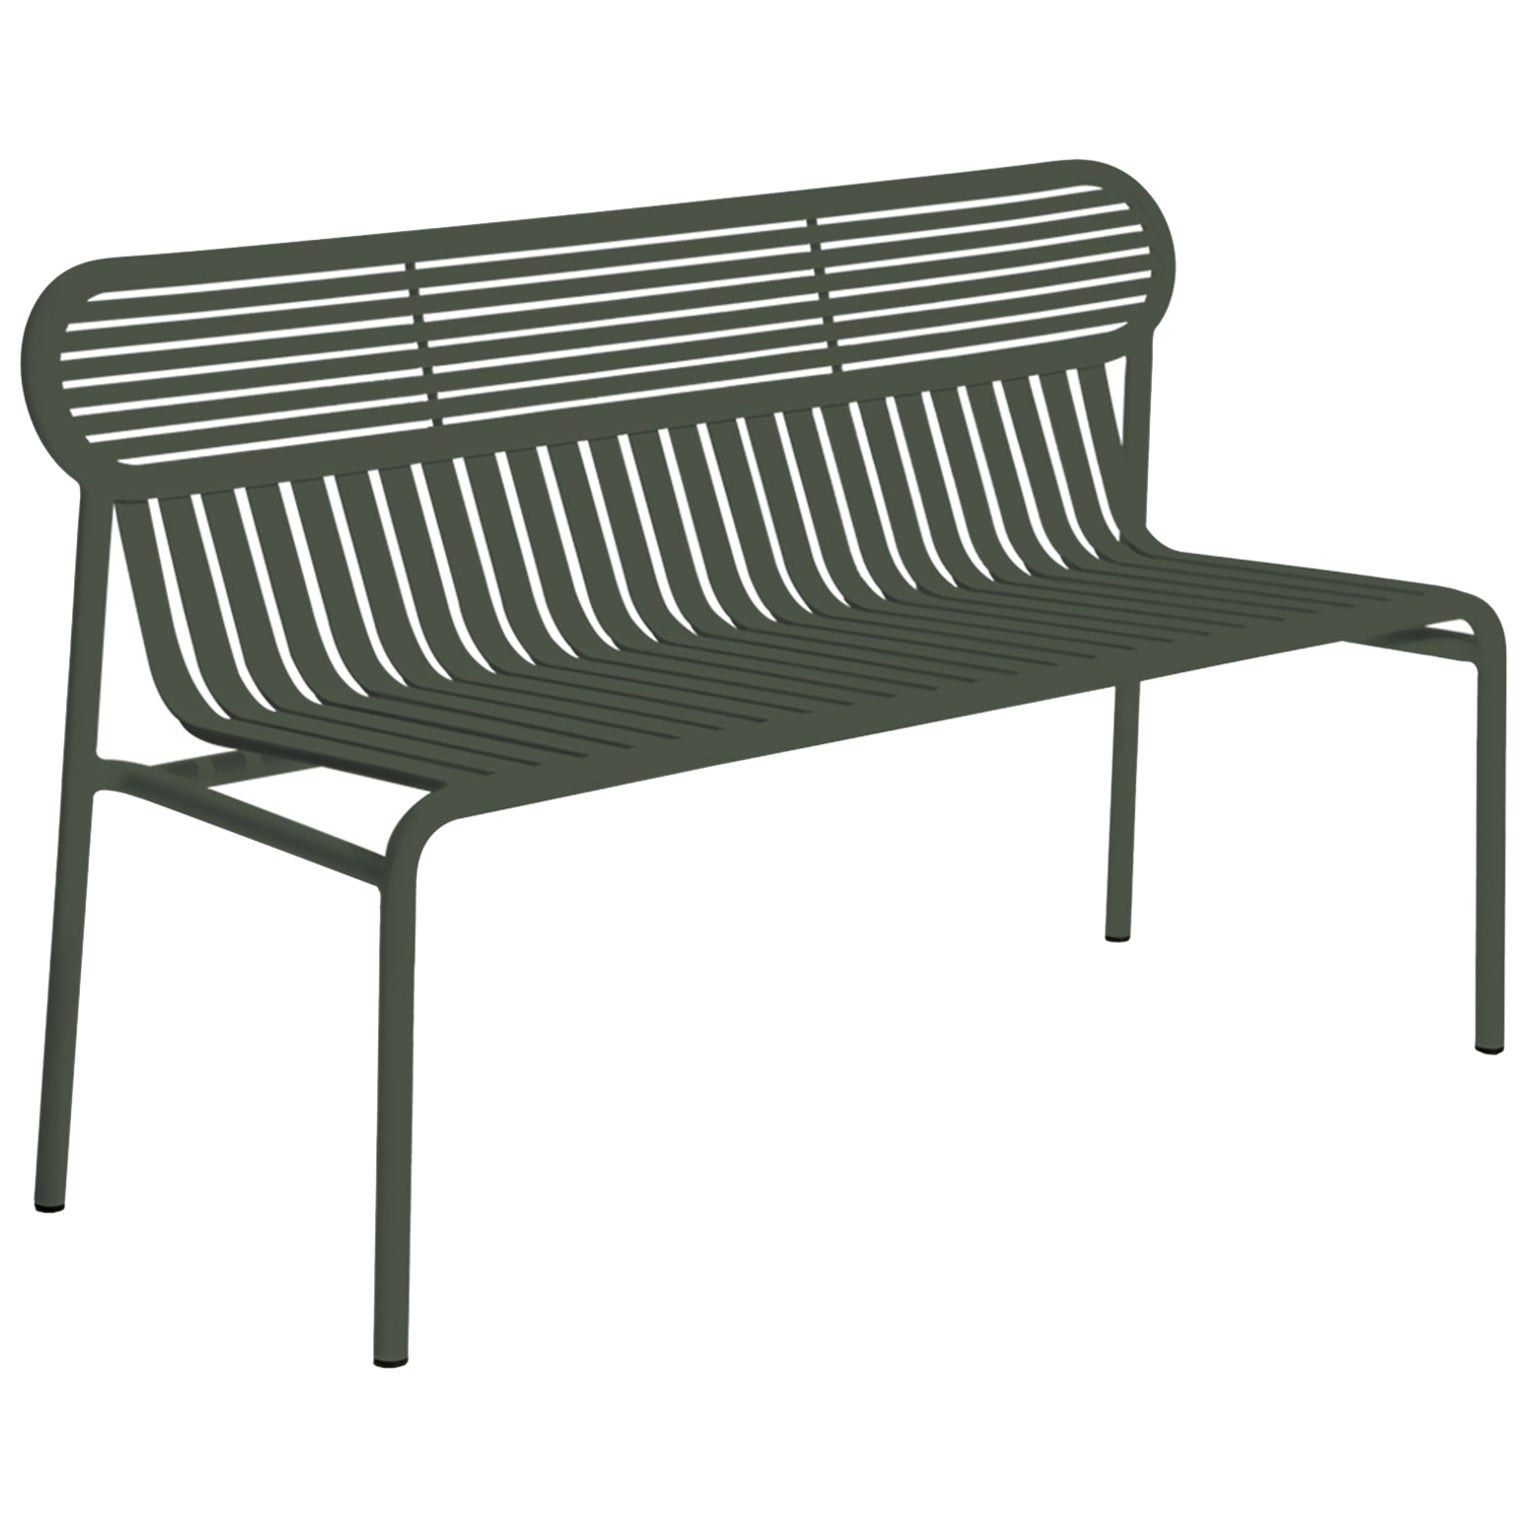 Petite Friture Week-End Bench in Glass Green Aluminium by Studio BrichetZiegler For Sale